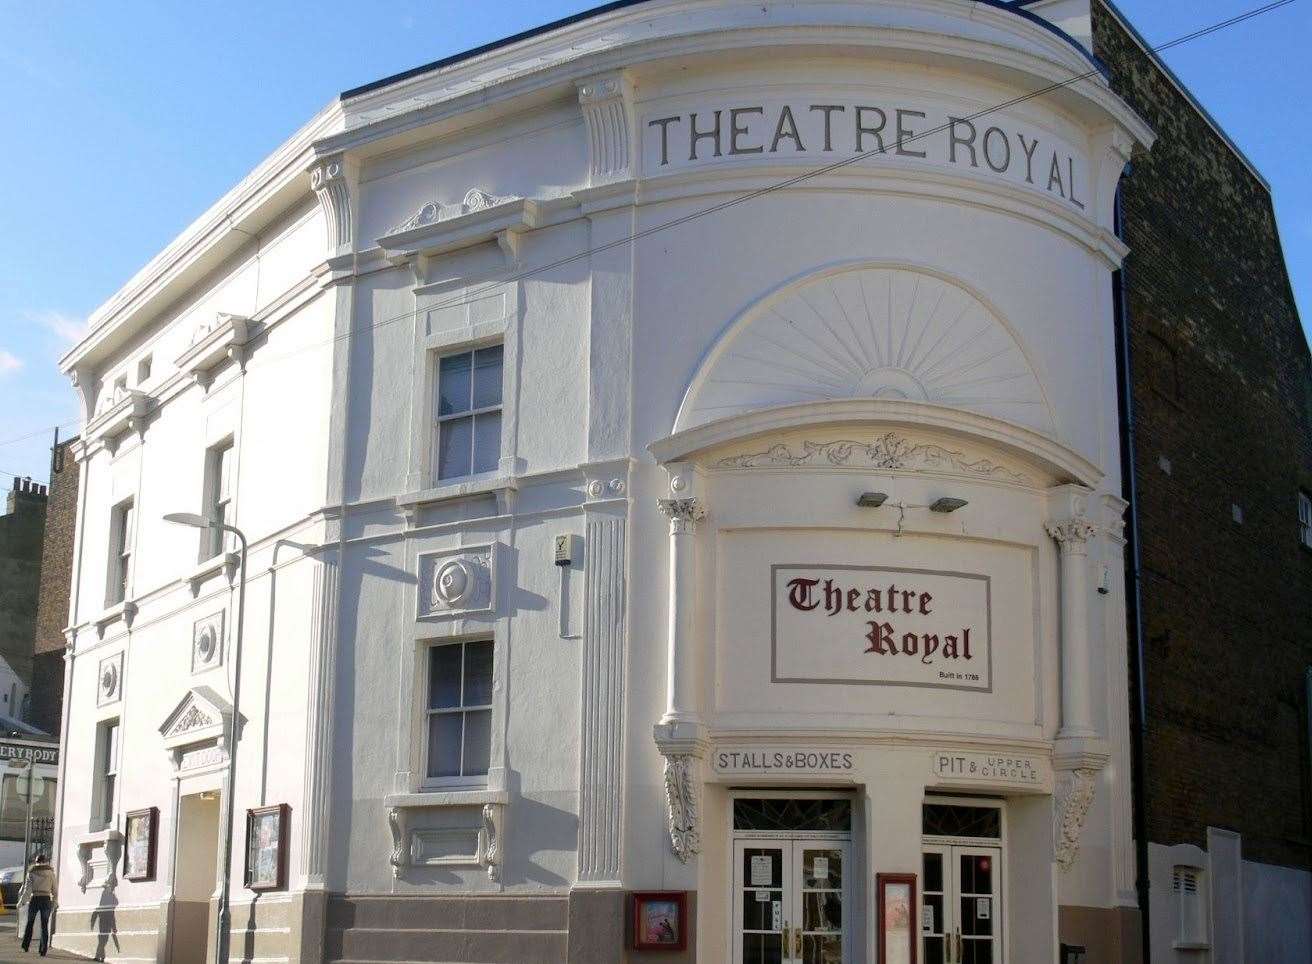 The Theatre Royal in Margate is going to be reinvigorated as part of plans to bring a new performing arts hub to Kent